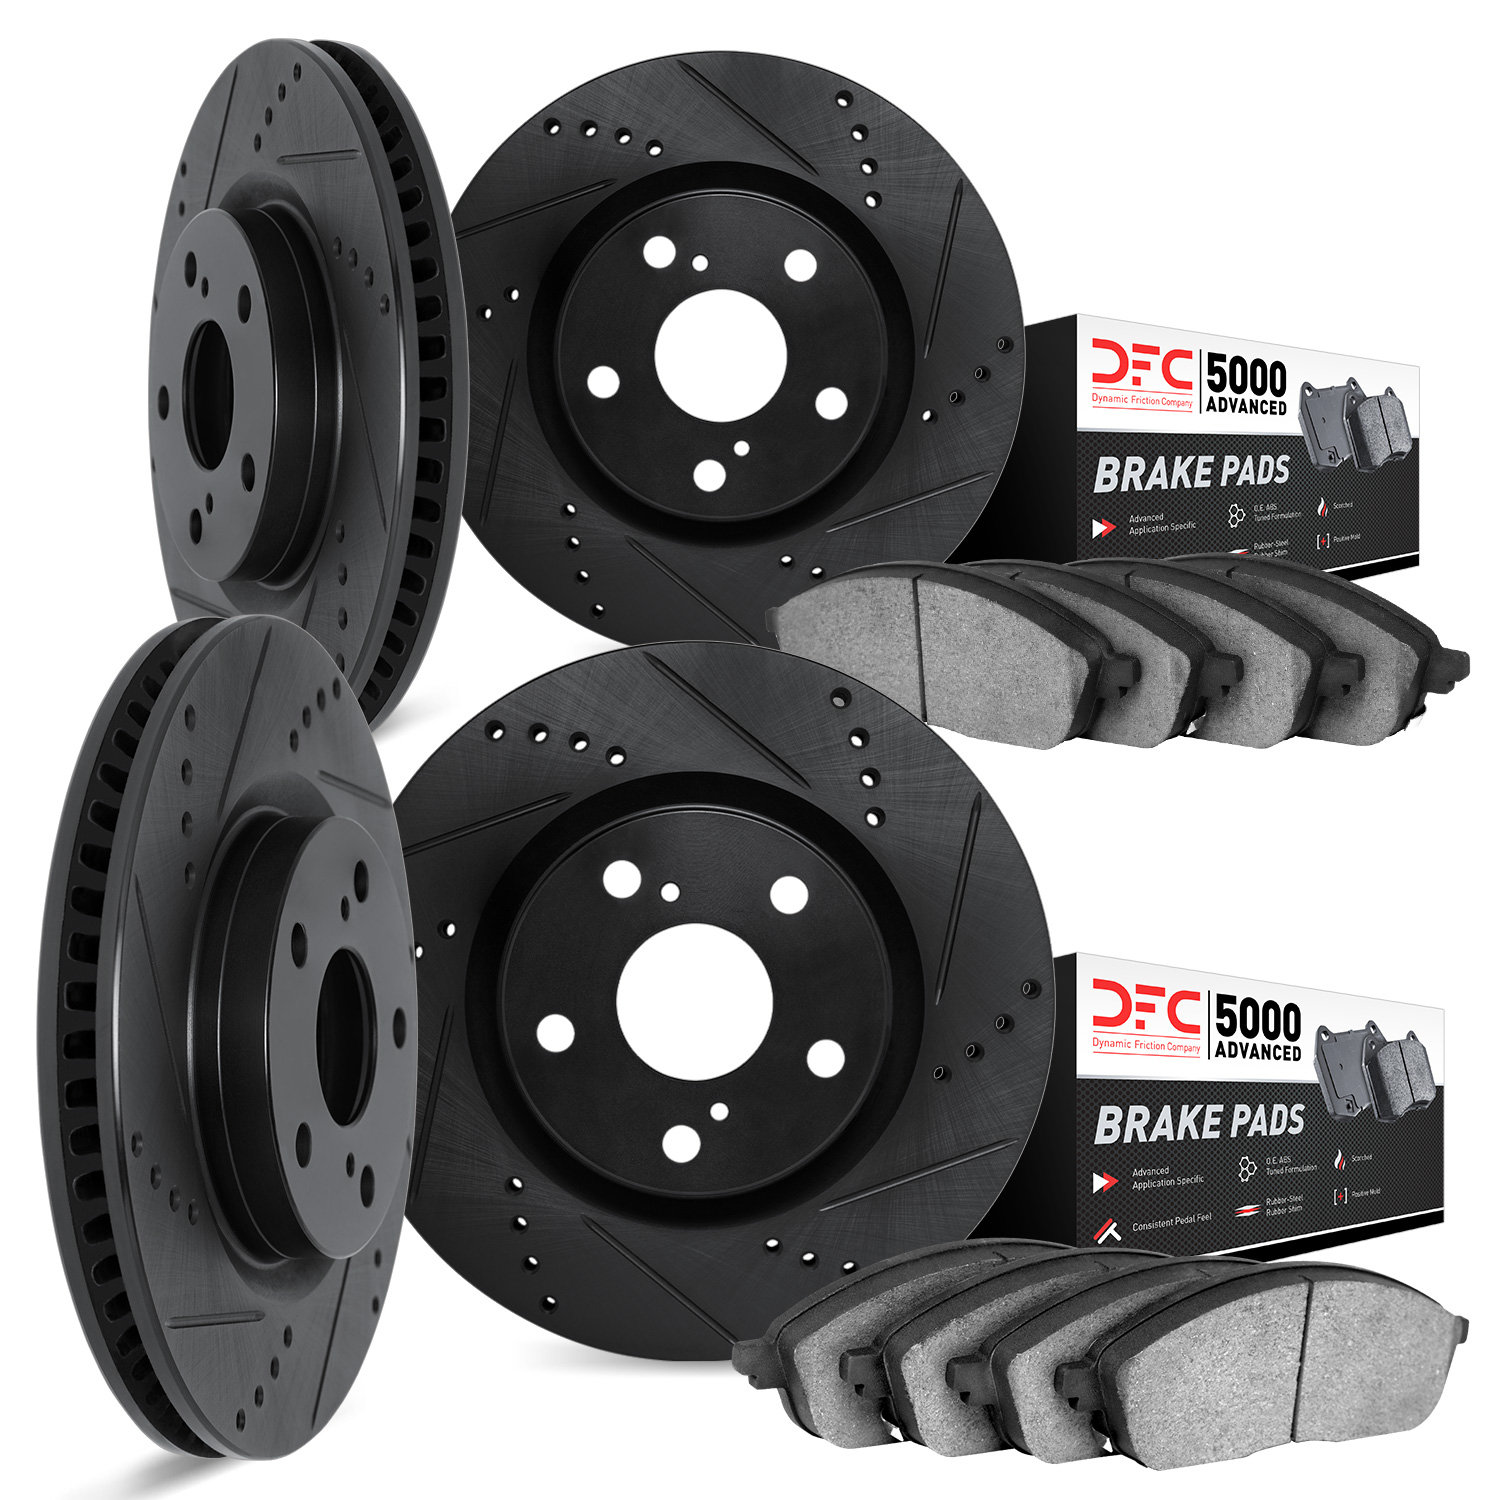 8504-11009 Drilled/Slotted Brake Rotors w/5000 Advanced Brake Pads Kit [Black], 2010-2016 Land Rover, Position: Front and Rear